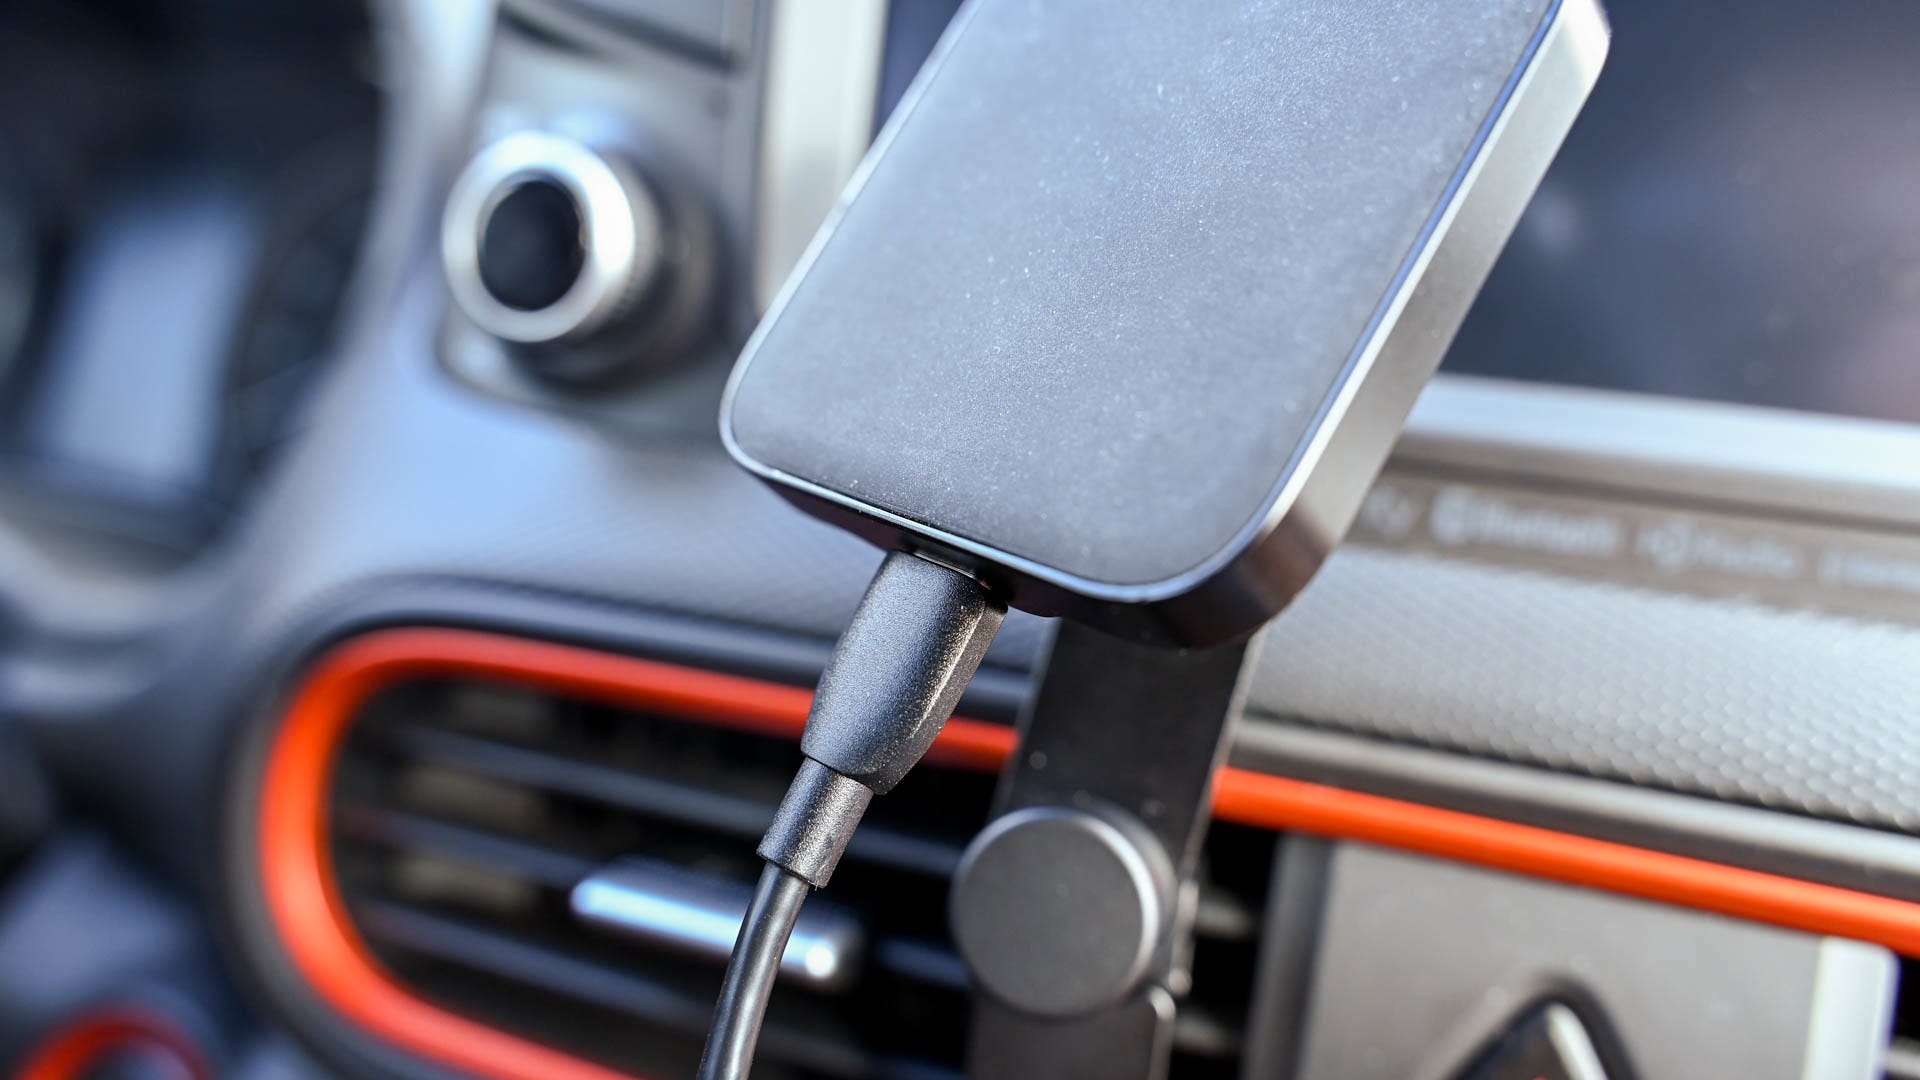 Peak Design wireless car vent mount charger and plug.